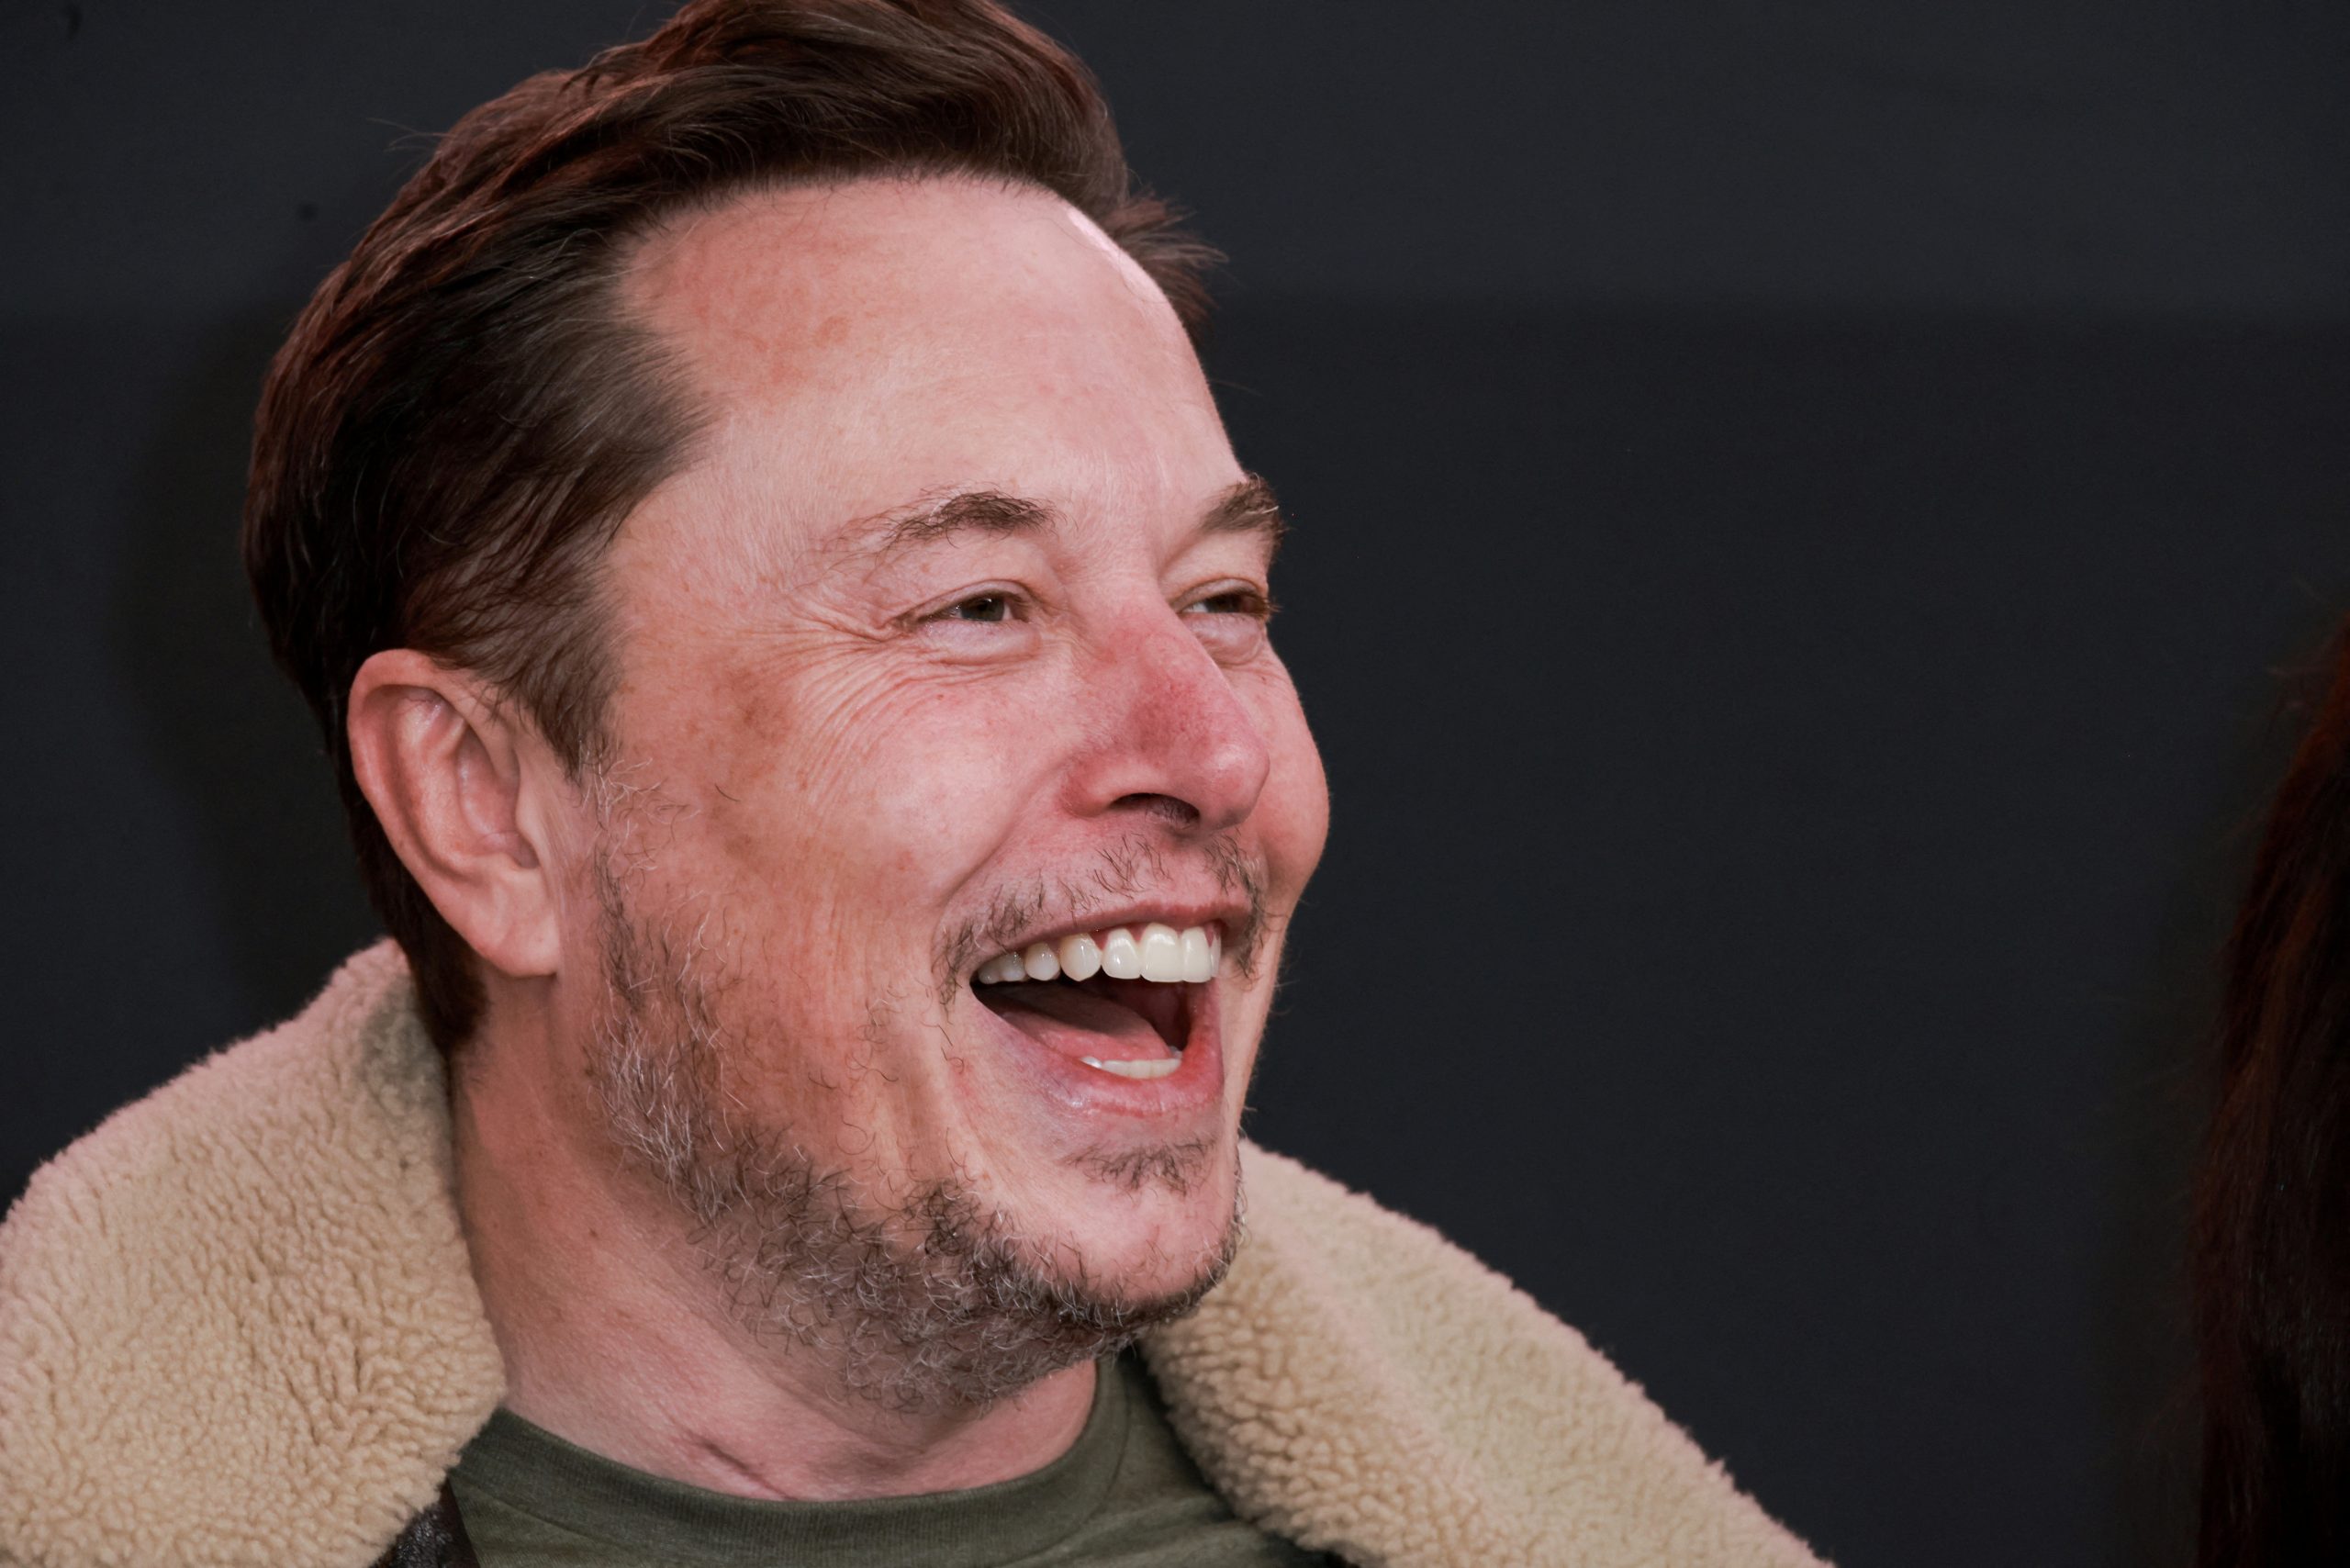 Musk defends his ketamine use as beneficial for investors in new video